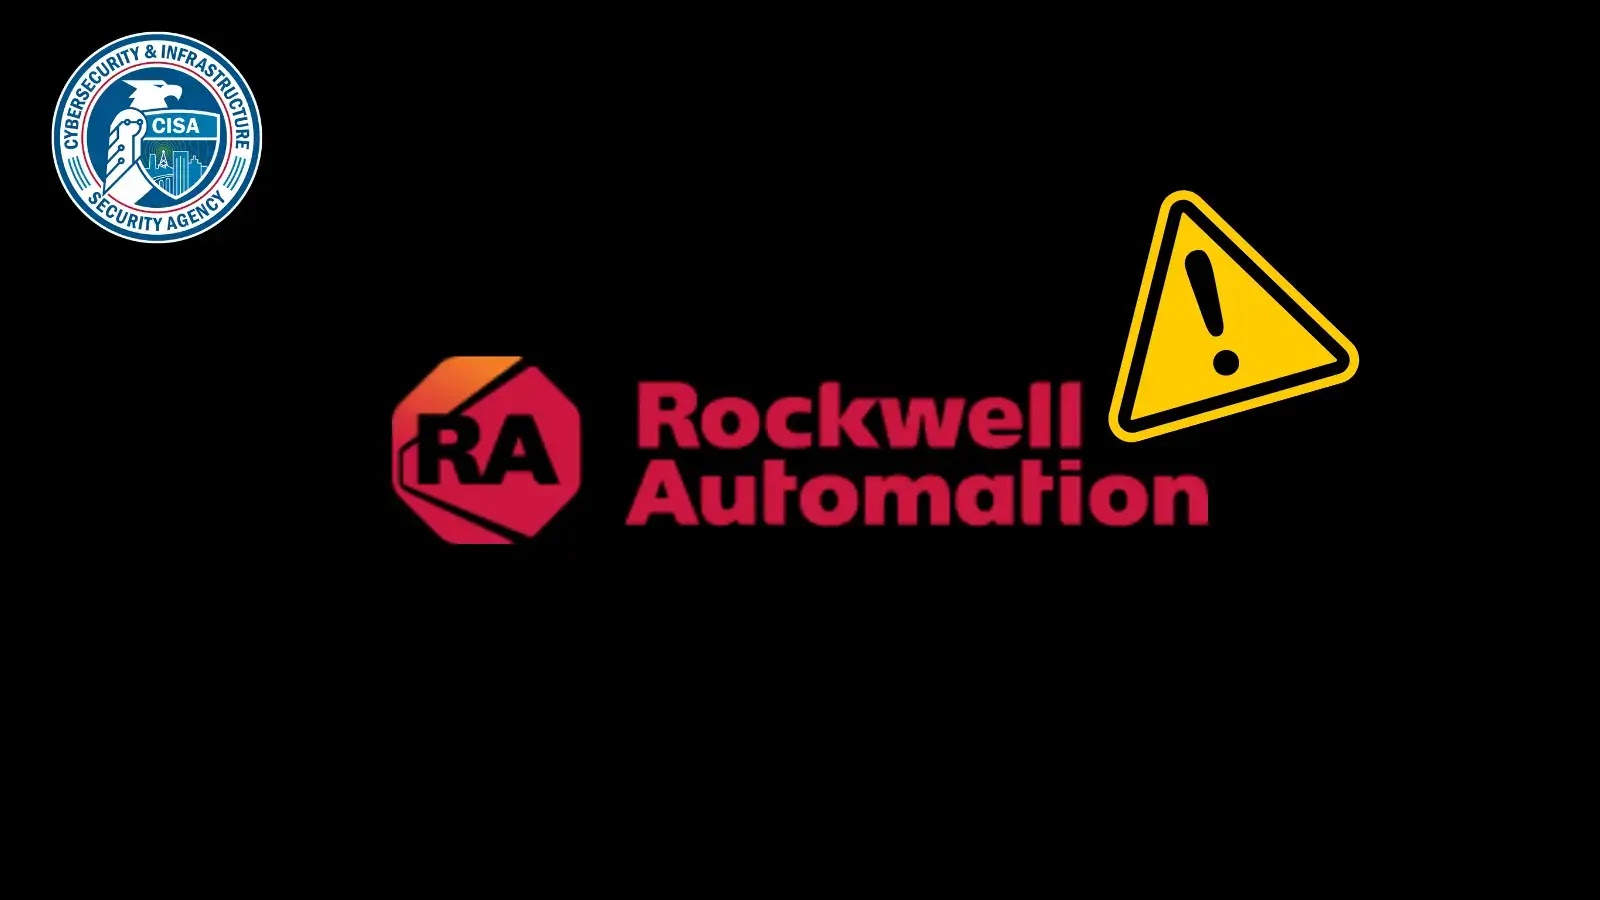 Rockwell Automation Warns Admin to Disconnect Devices From Internet